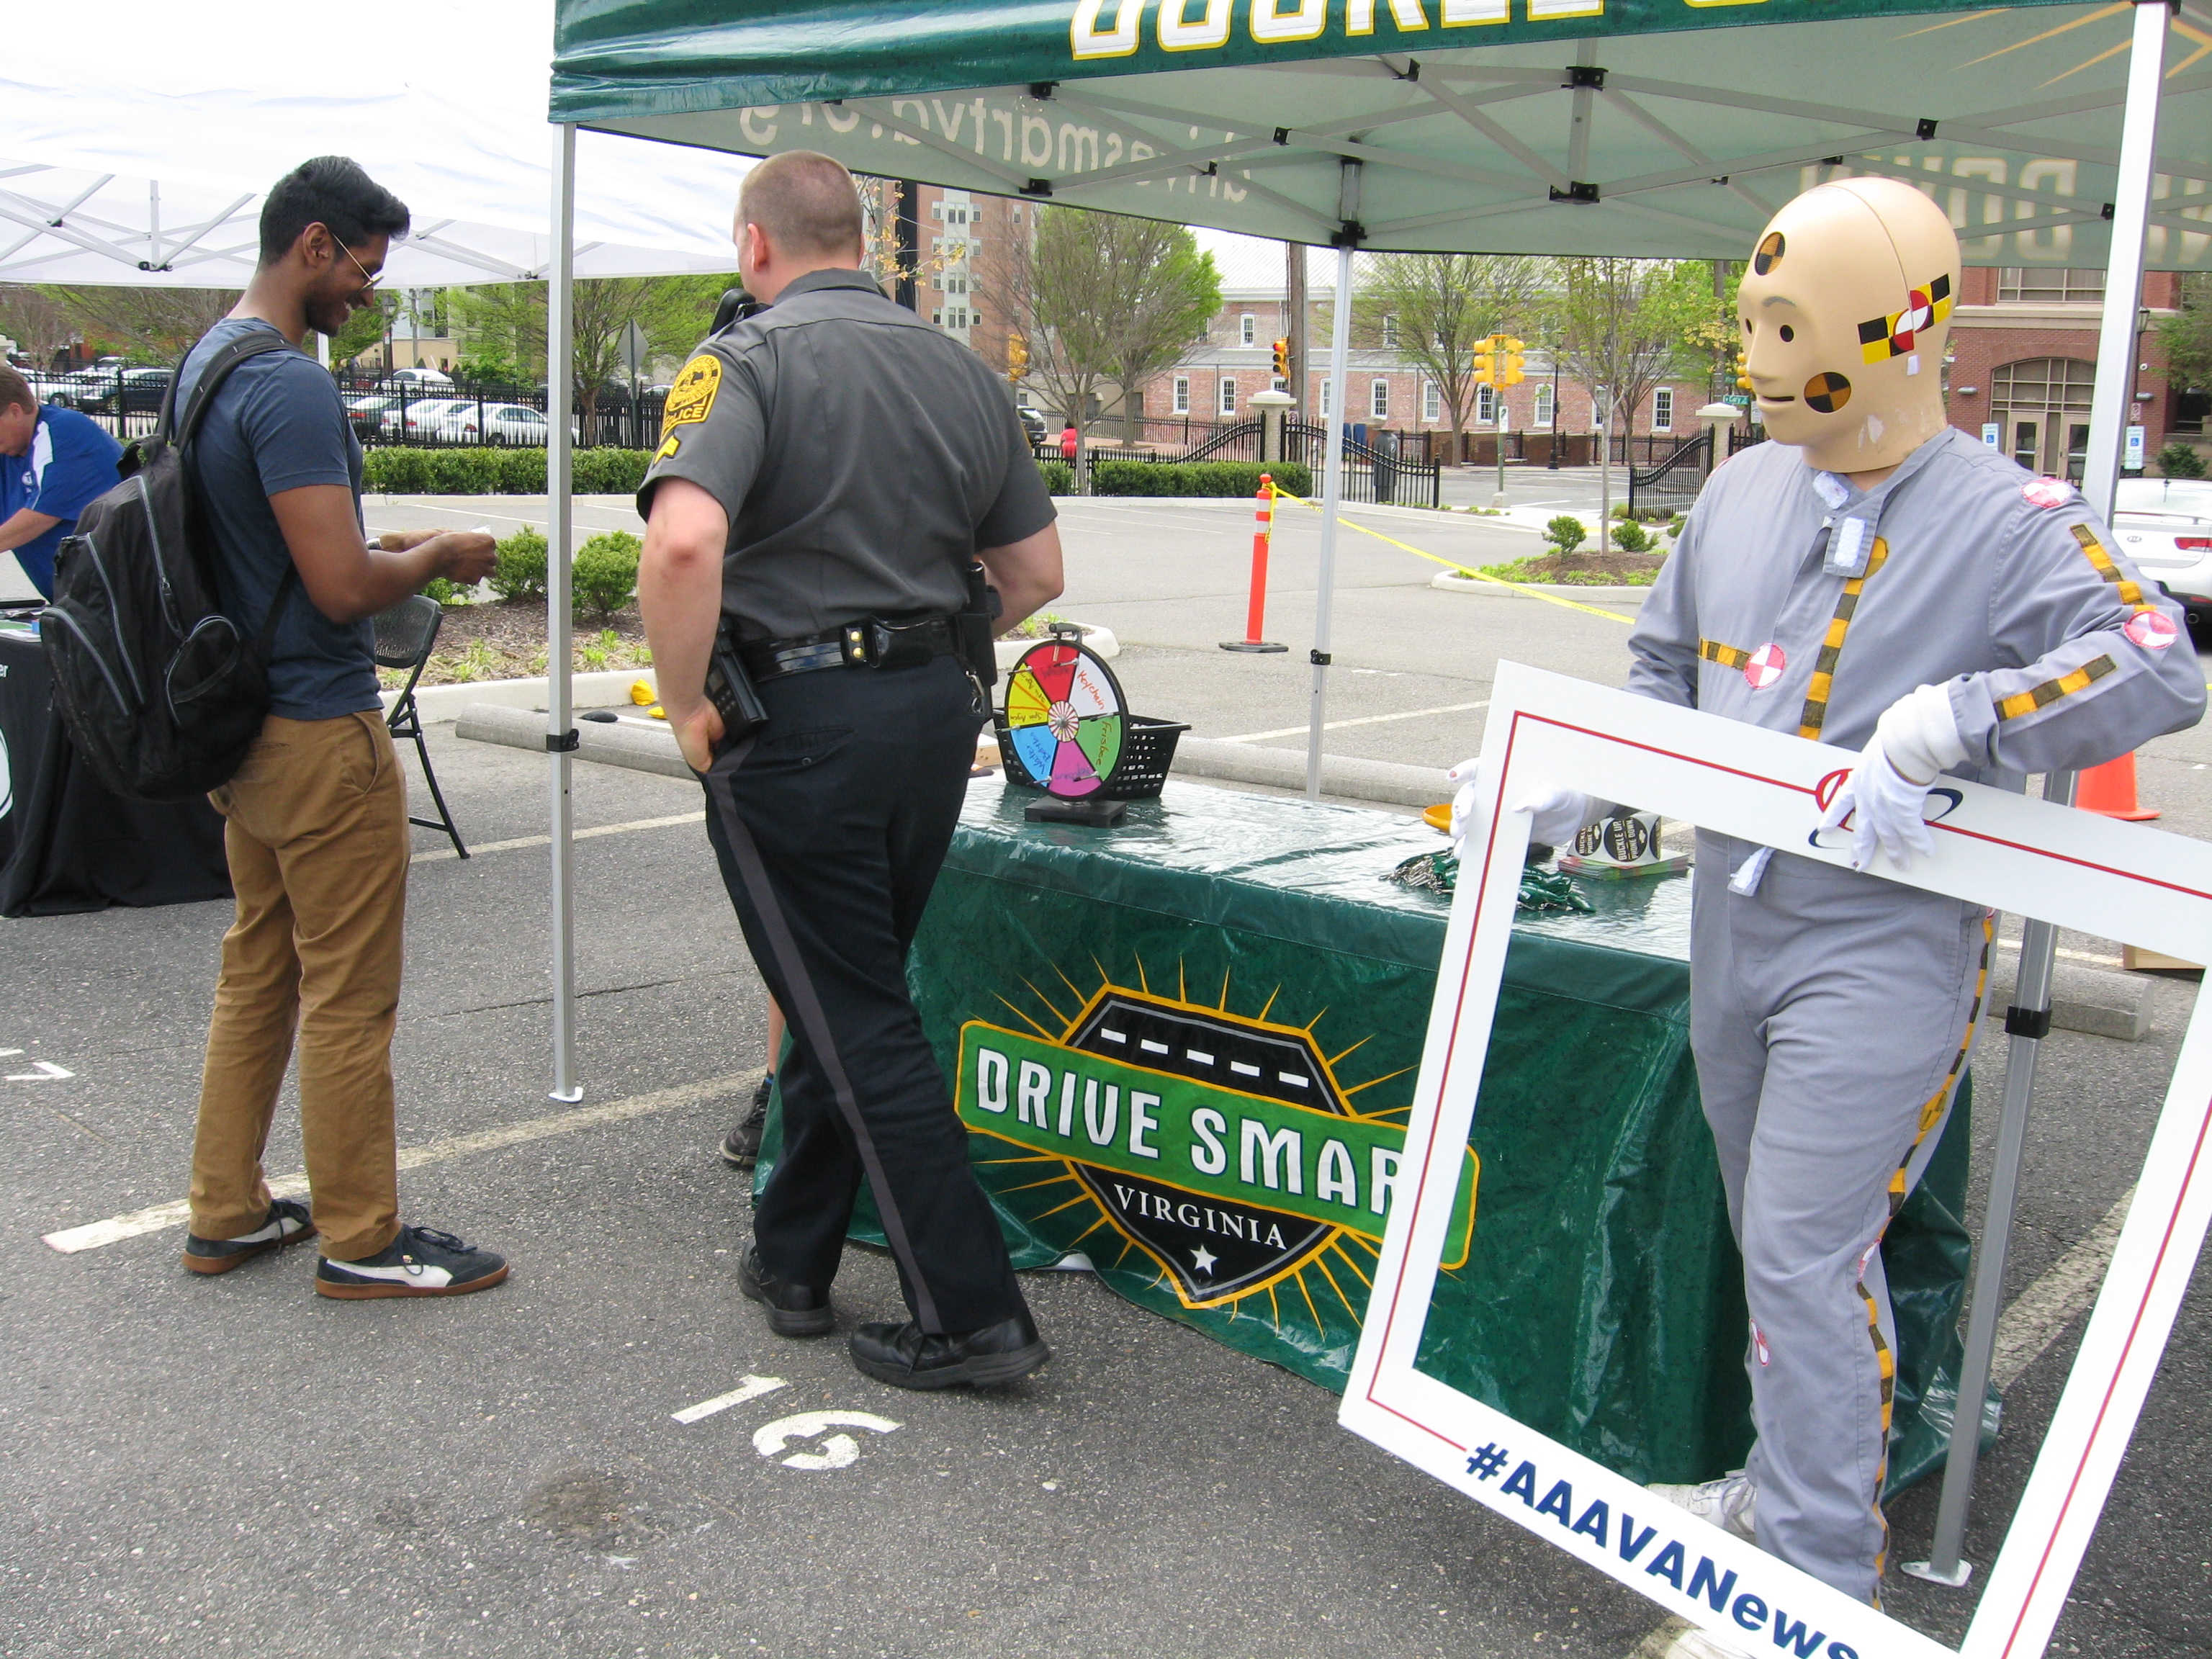 VCU police officer at a drive smart event with student and mannequin in JL lot